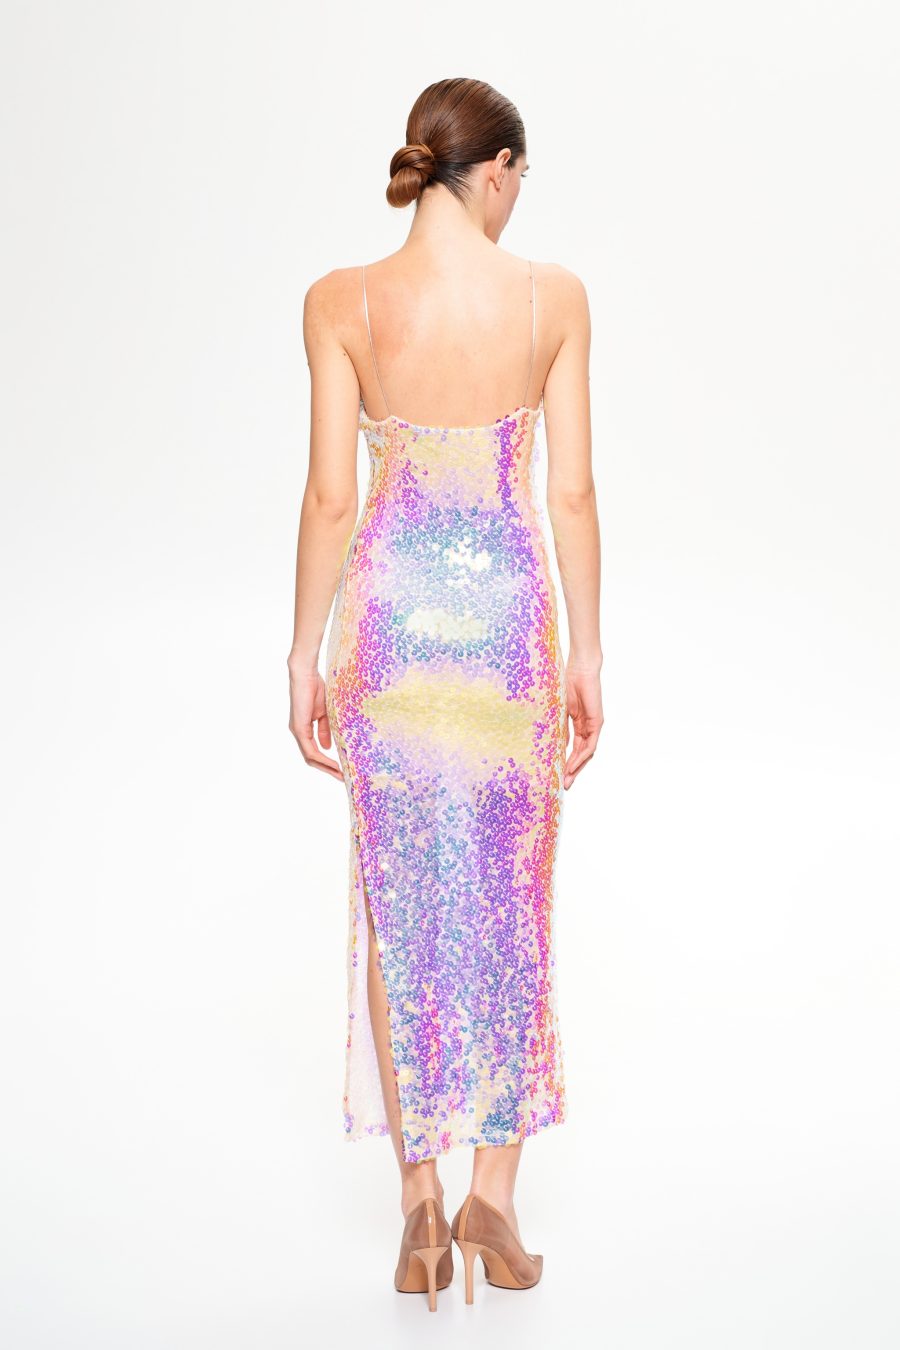 dress-with-sequins (7)